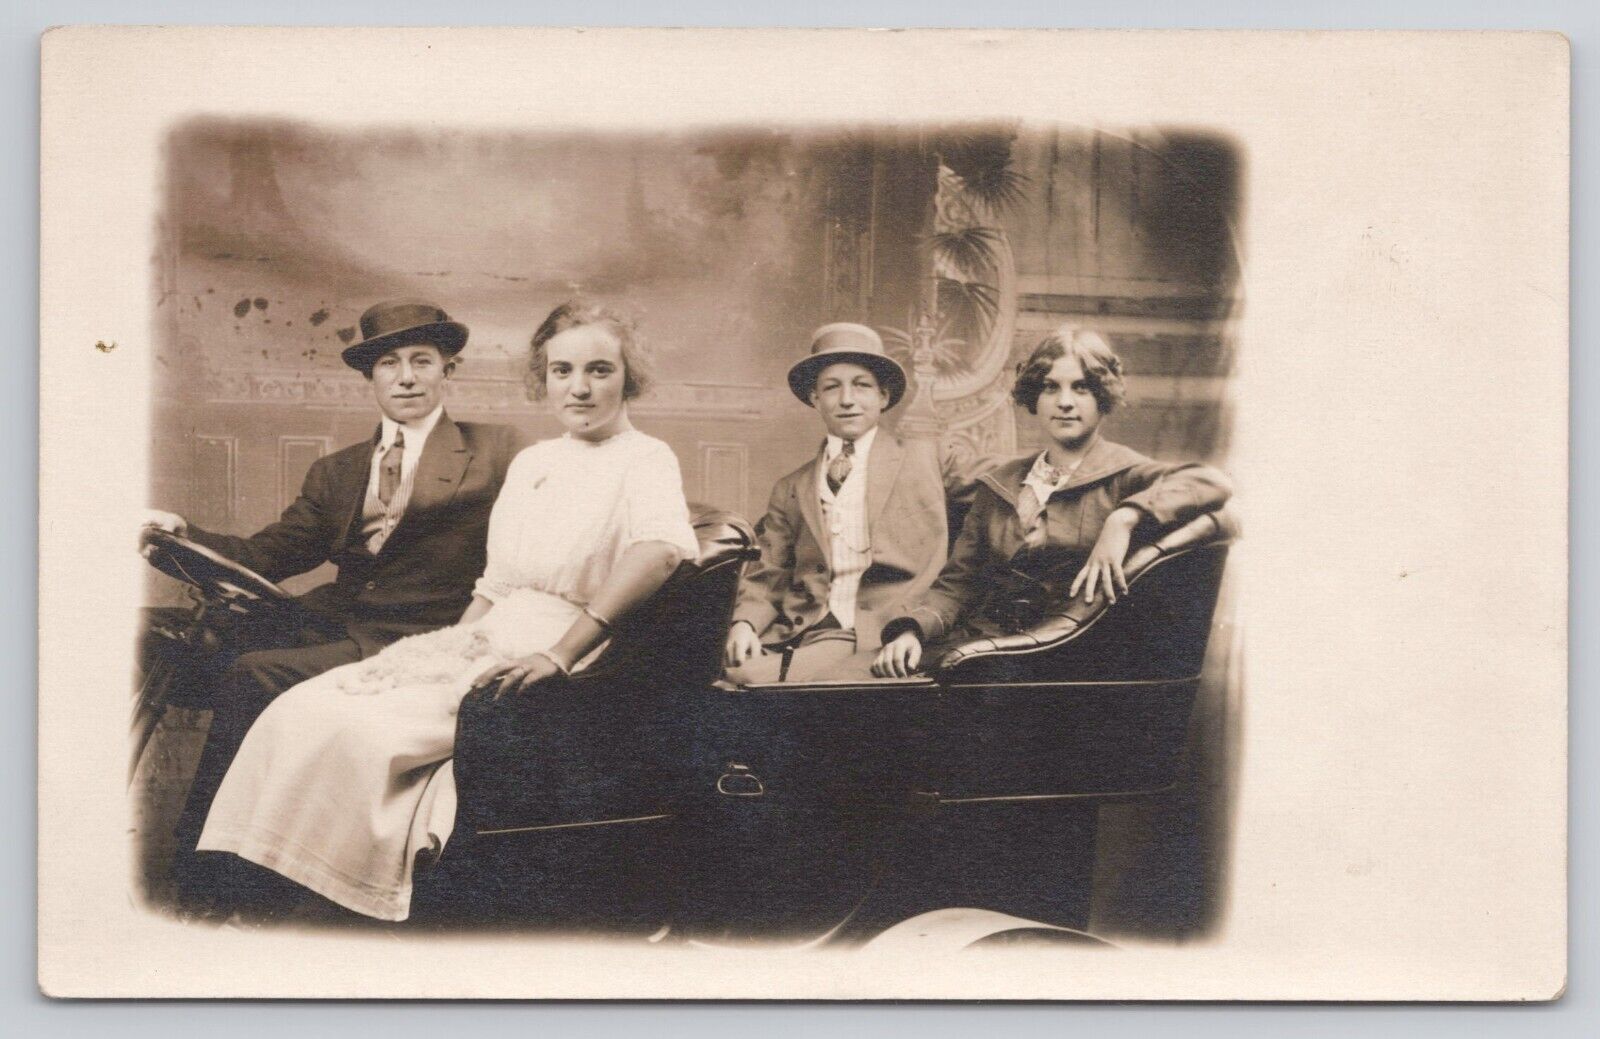 Family of 4 Sitting in a Prop Antique Car Formal Attire c1904-1918 RPPC Postcard